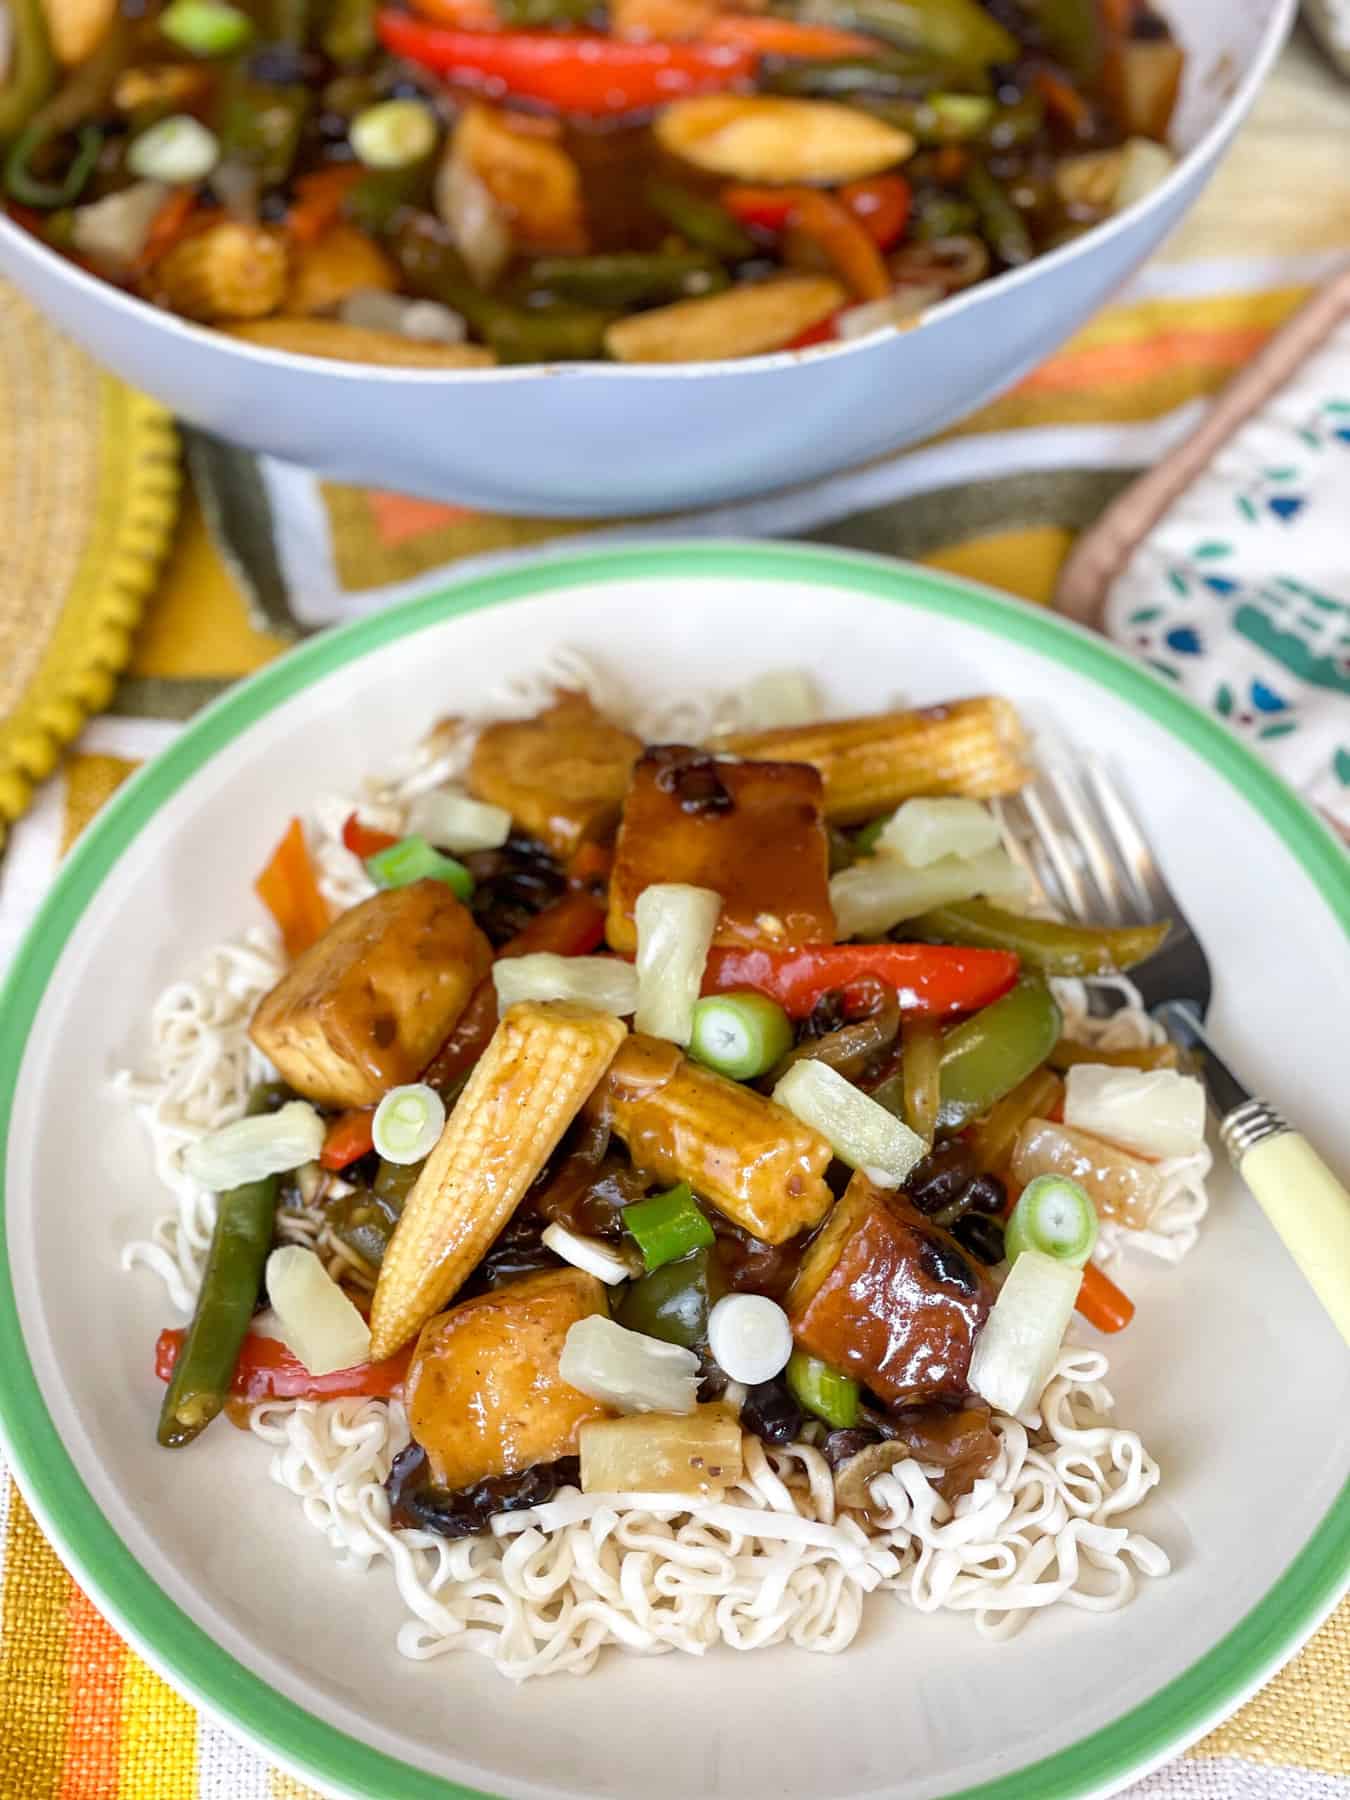 Sweet and sour tofu, veggies and black beans served over noodles on a green rimmed plate with pineapple pieces on top and sliced spring onions, wok in background.